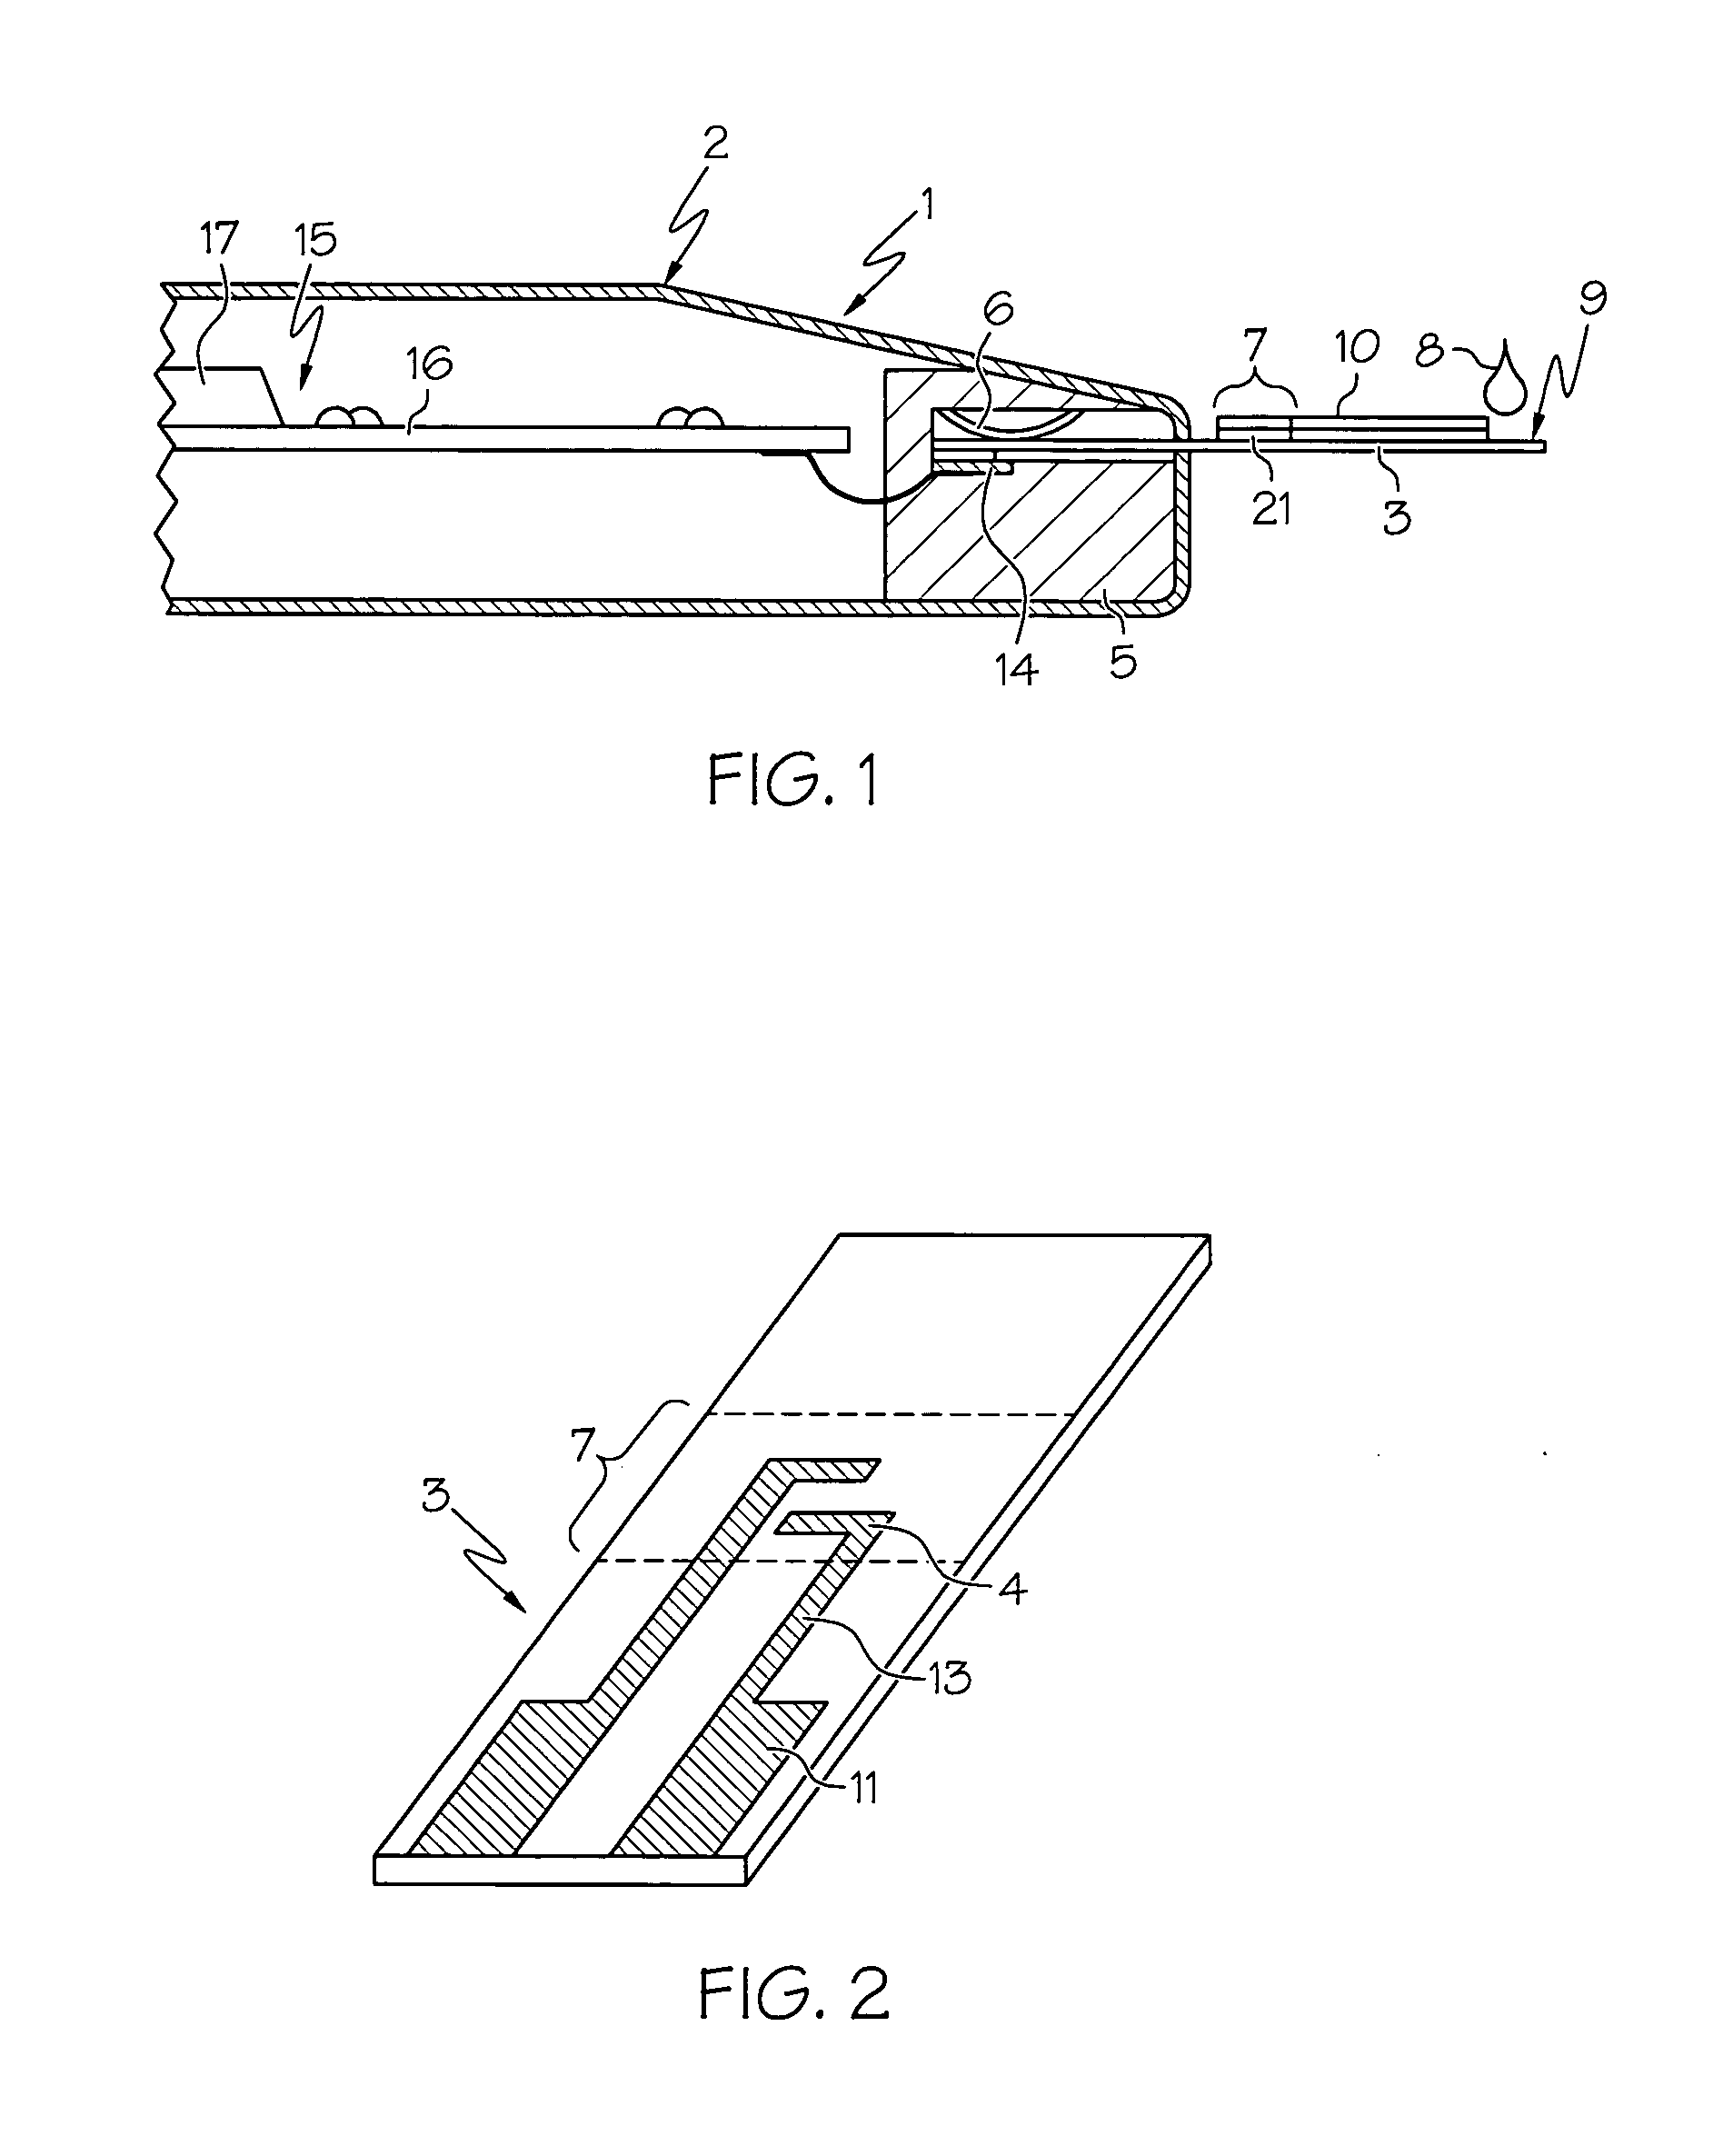 Test element analysis system with contact surfaces coated with hard material